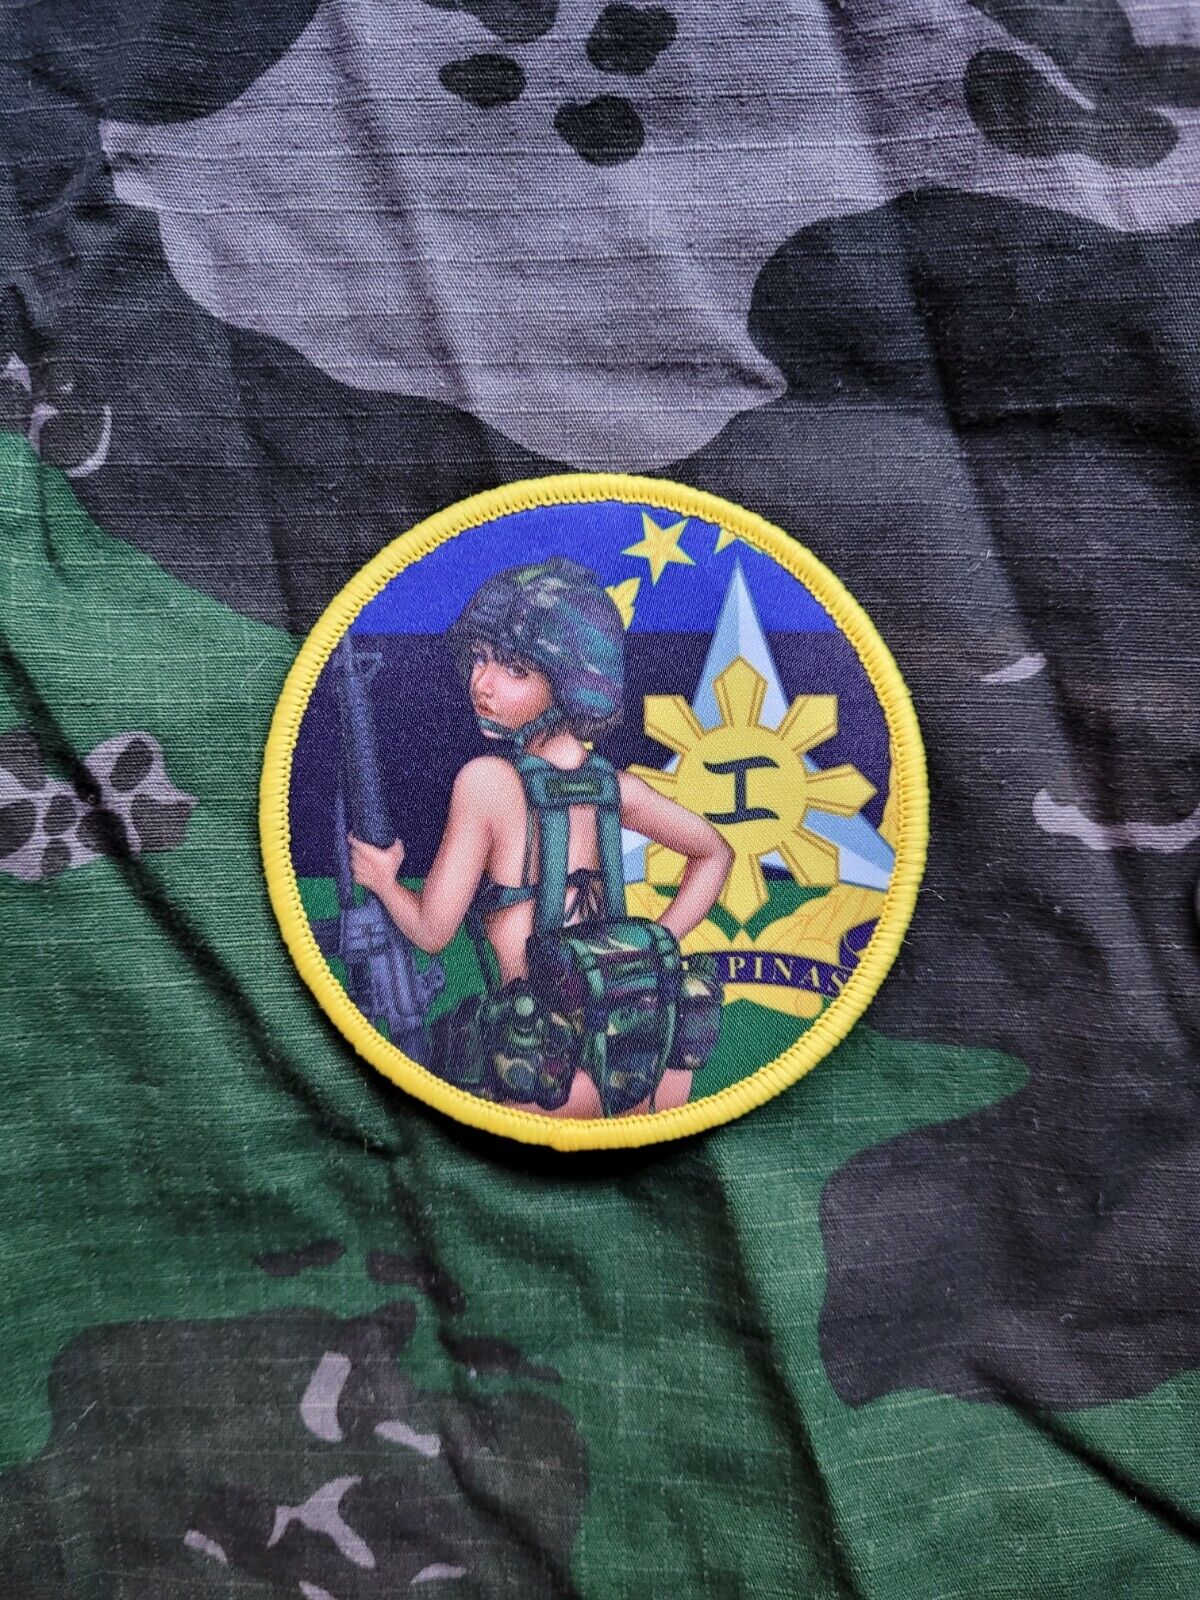 Armed Forces of the Philippines (AFP), pinup girl morale anime airsoft war patch